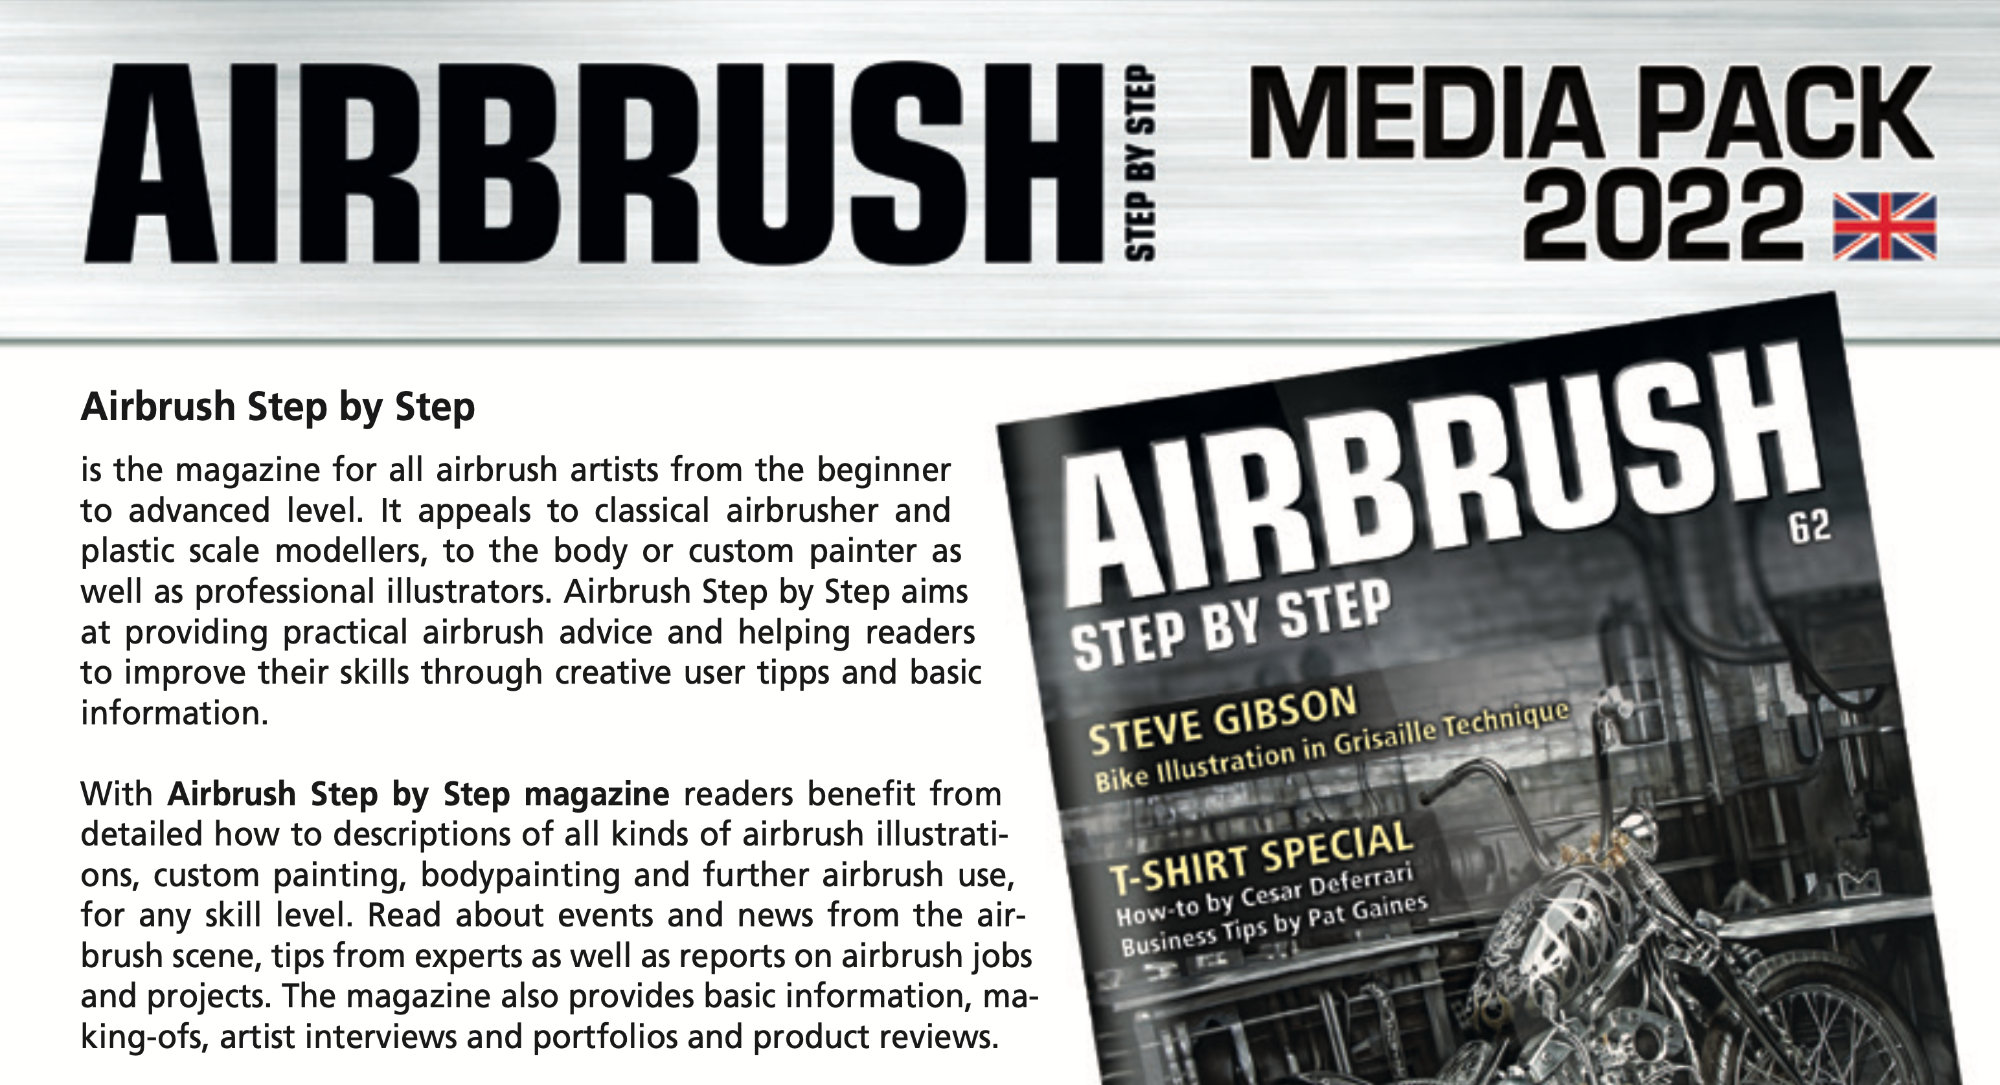 For a successful business year 2022: Plan your advertising in AIRBRUSH STEP BY STEP now!